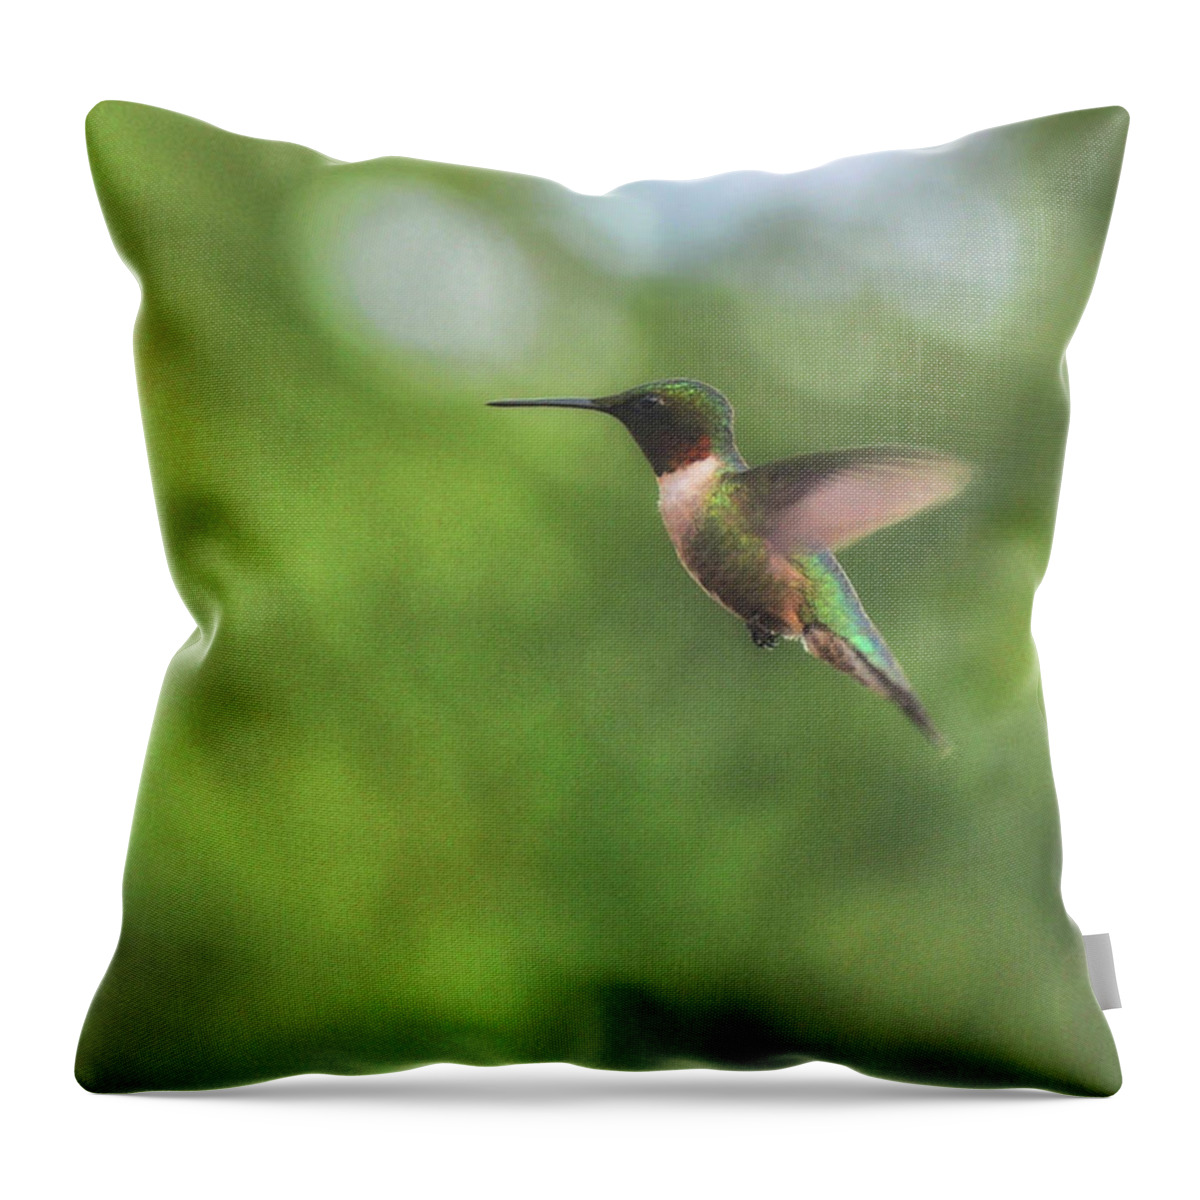 Beating Throw Pillow featuring the photograph Wings In Motion by JAMART Photography